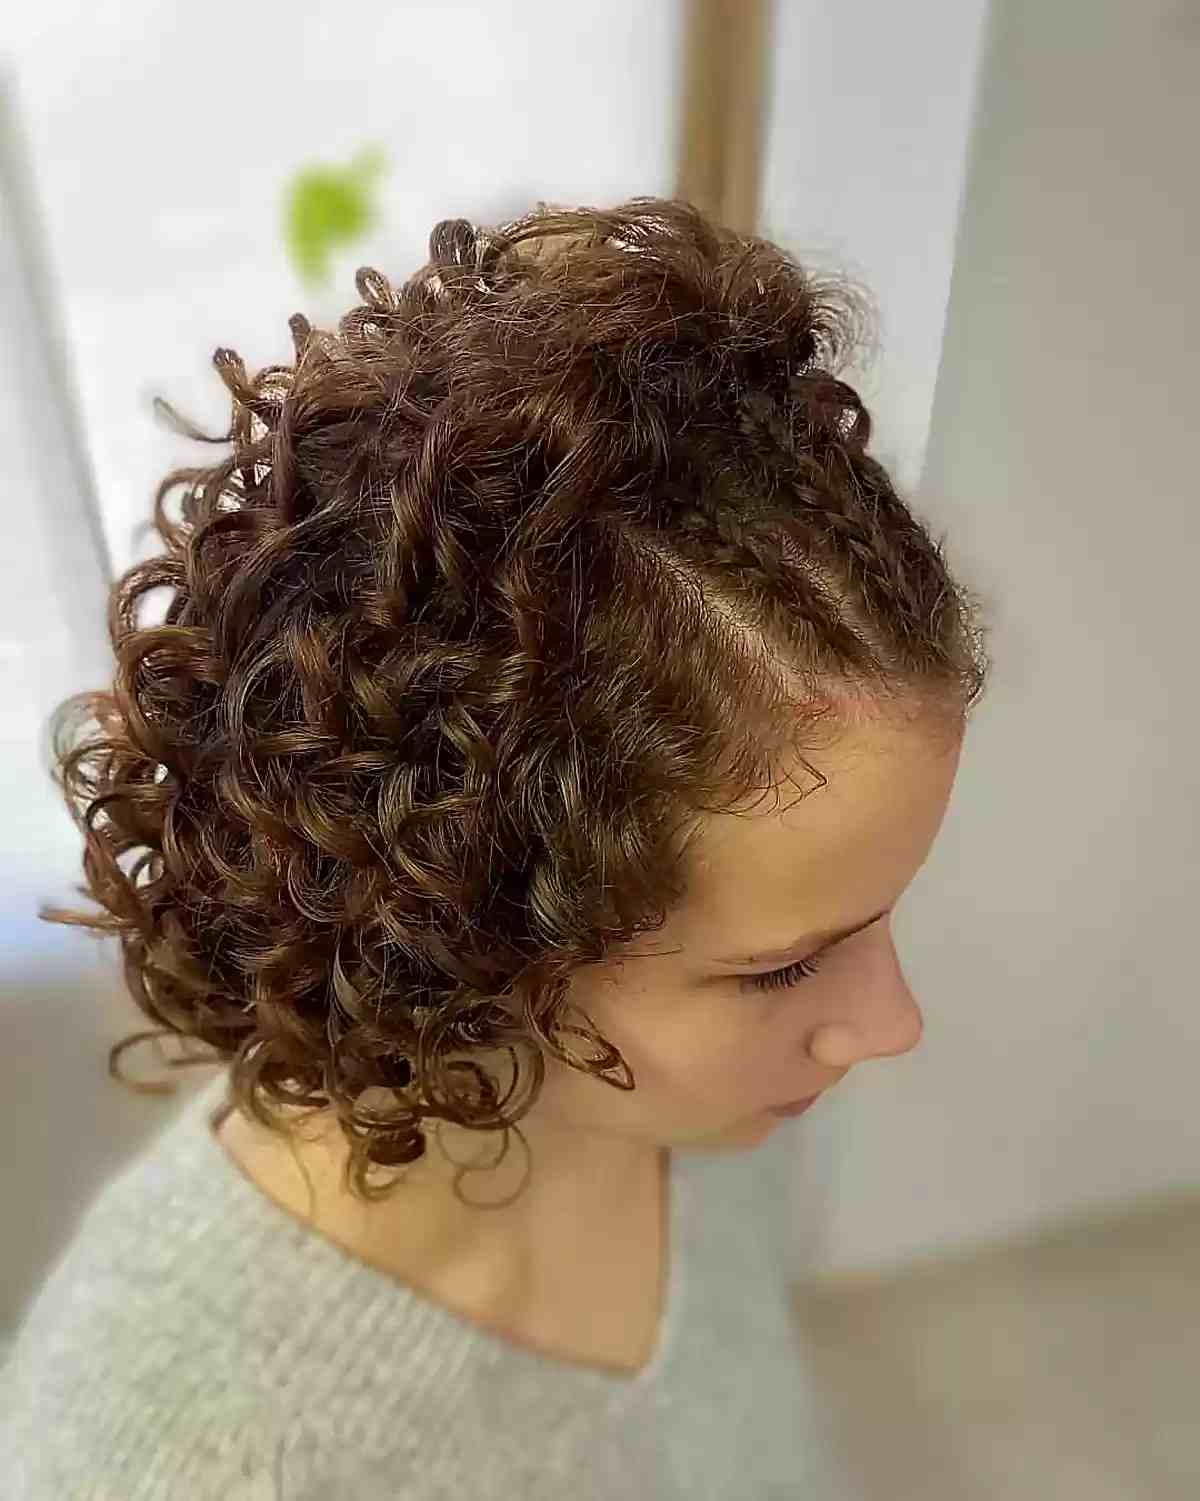 Short Layered Bob with Natural Curls and Mini Braids for Thick-Haired Women going to the prom